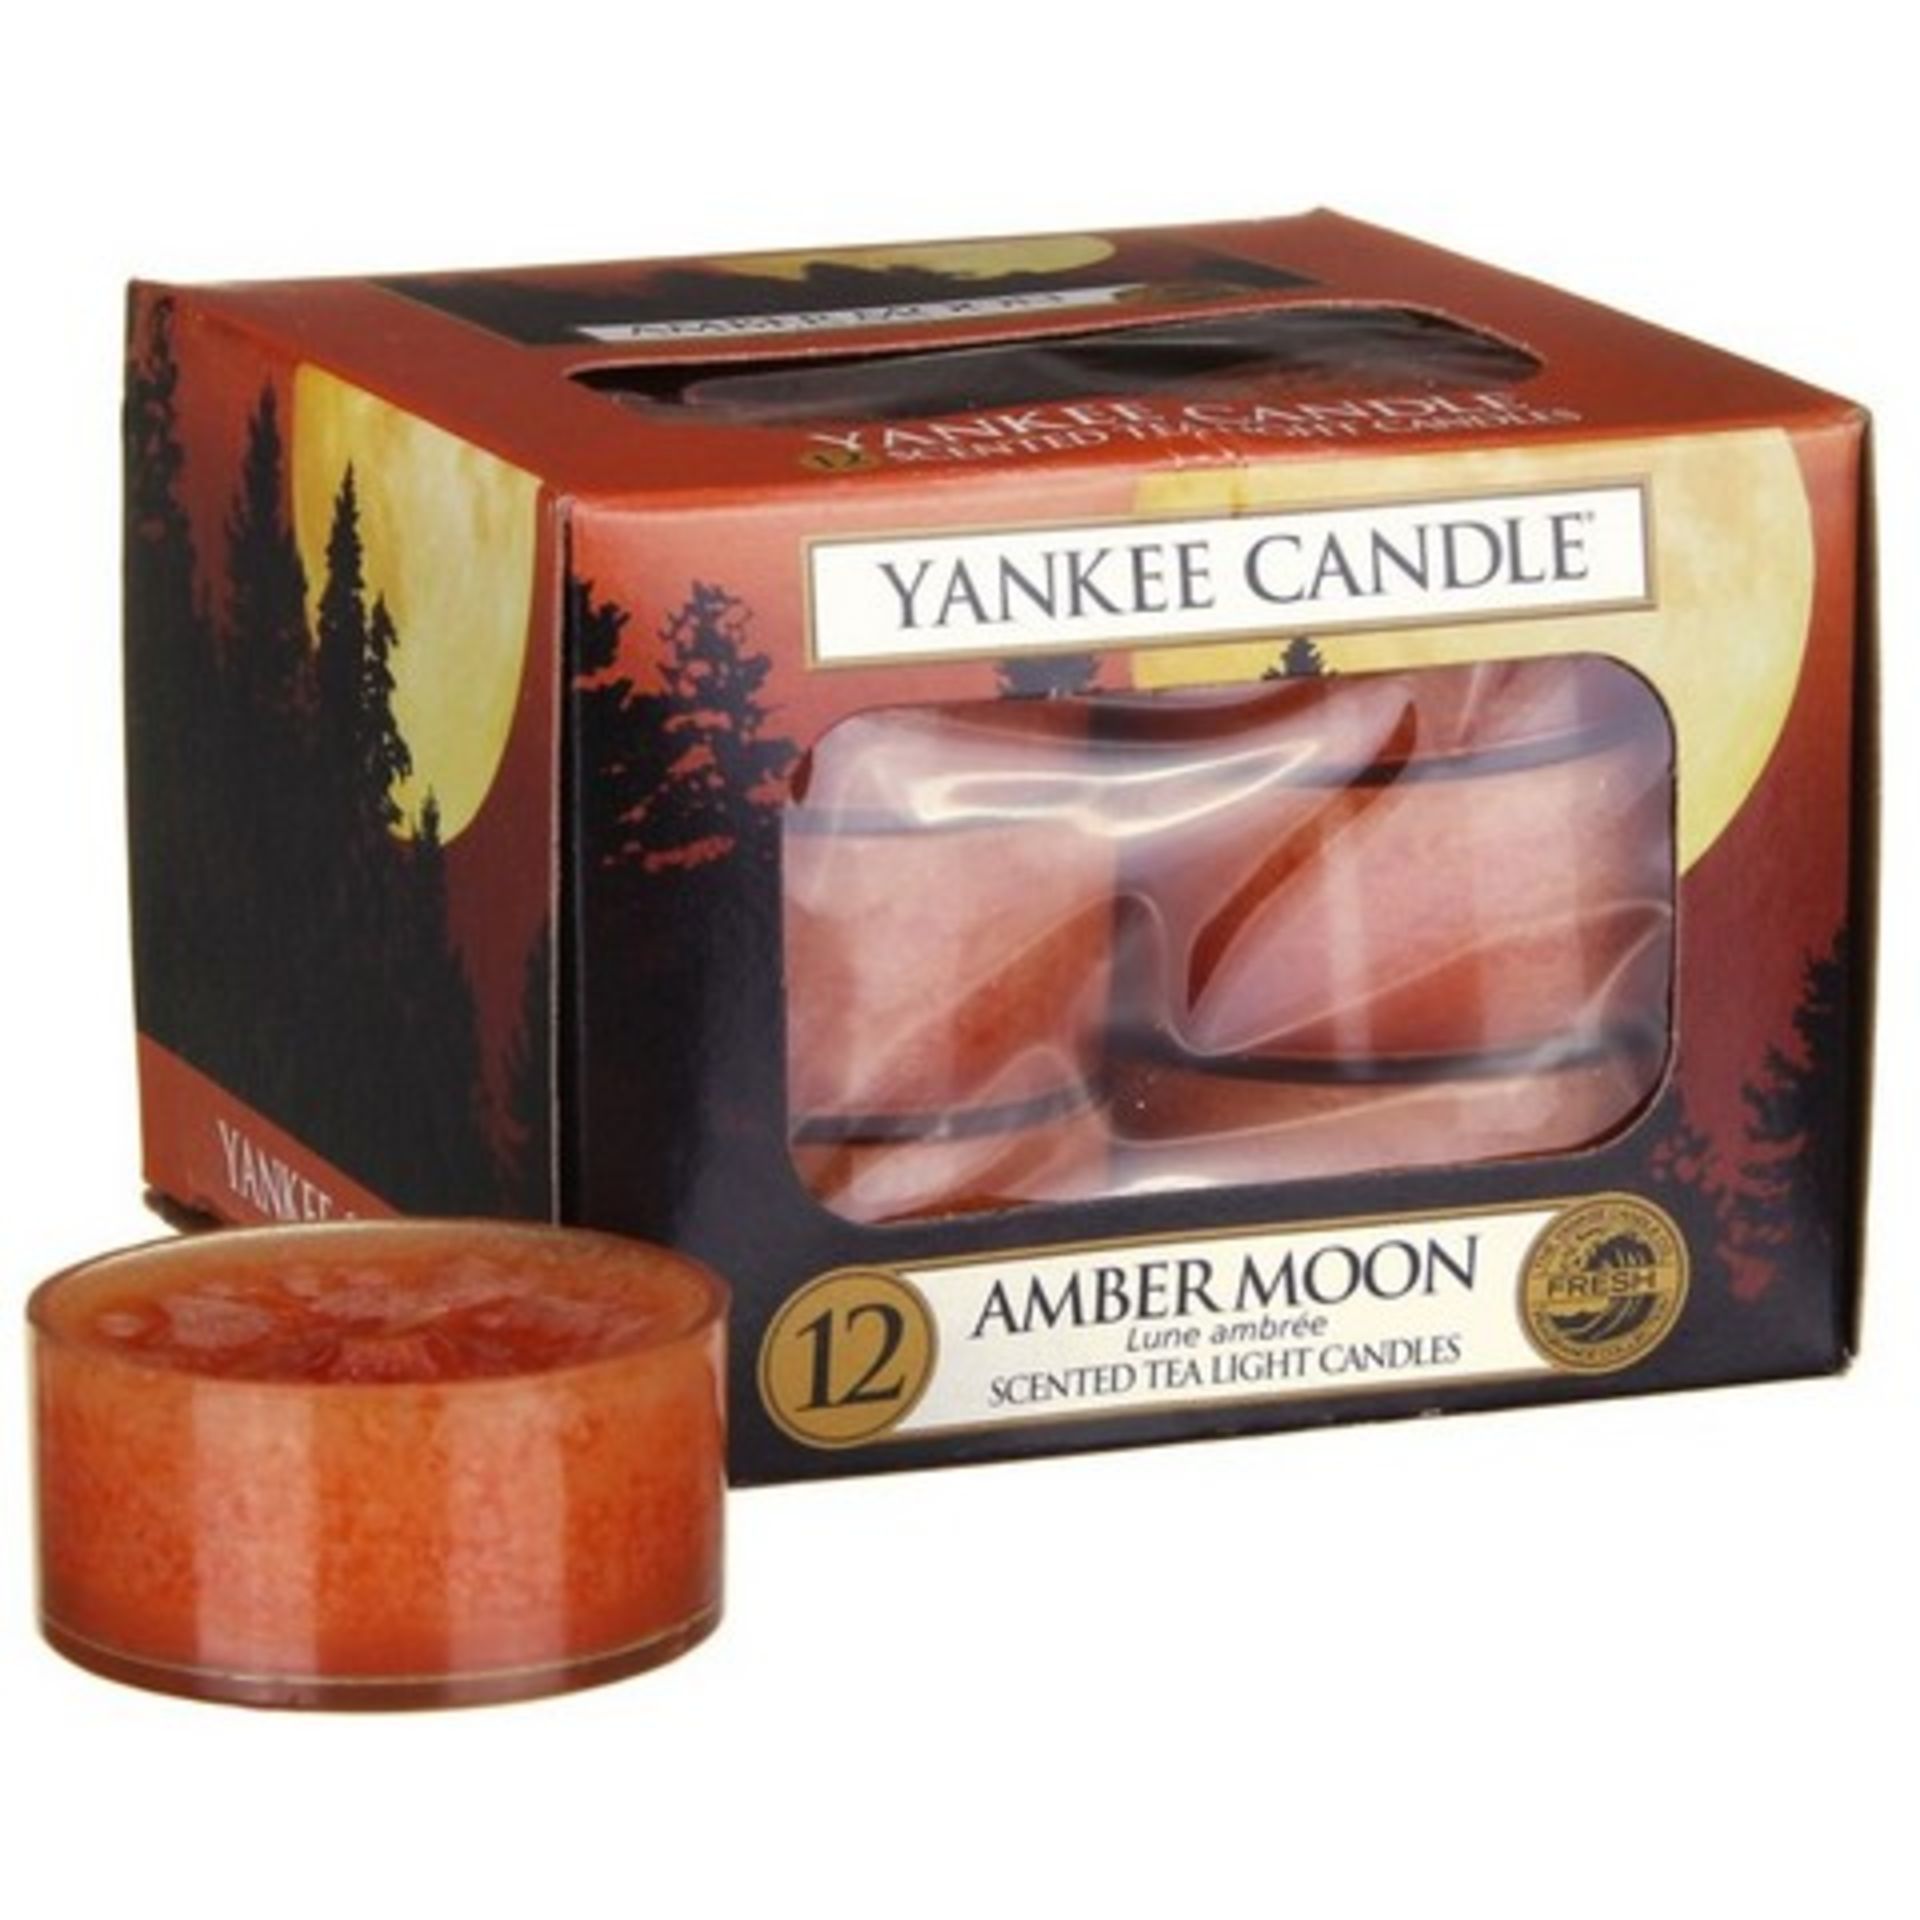 V Brand New 12 Yankee Candle Scented Tea Light Candles Amber Moon